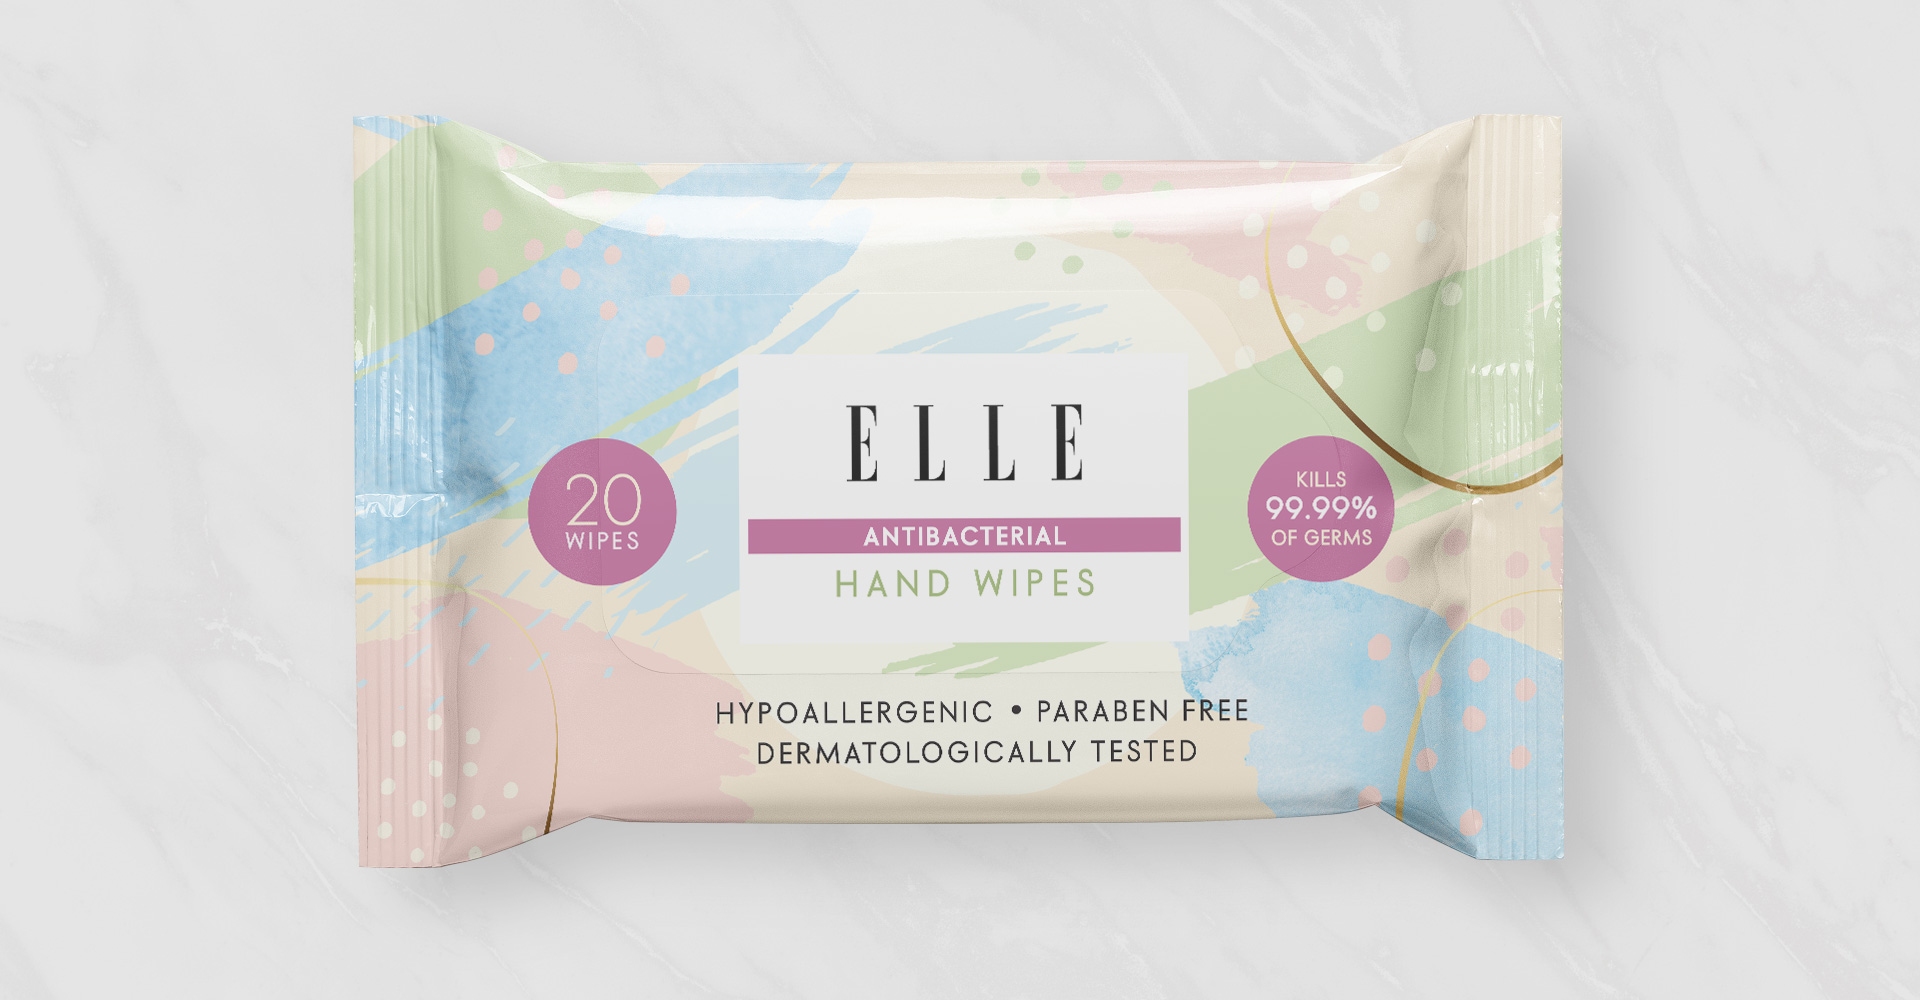 Packaging design for Elle cosmetics